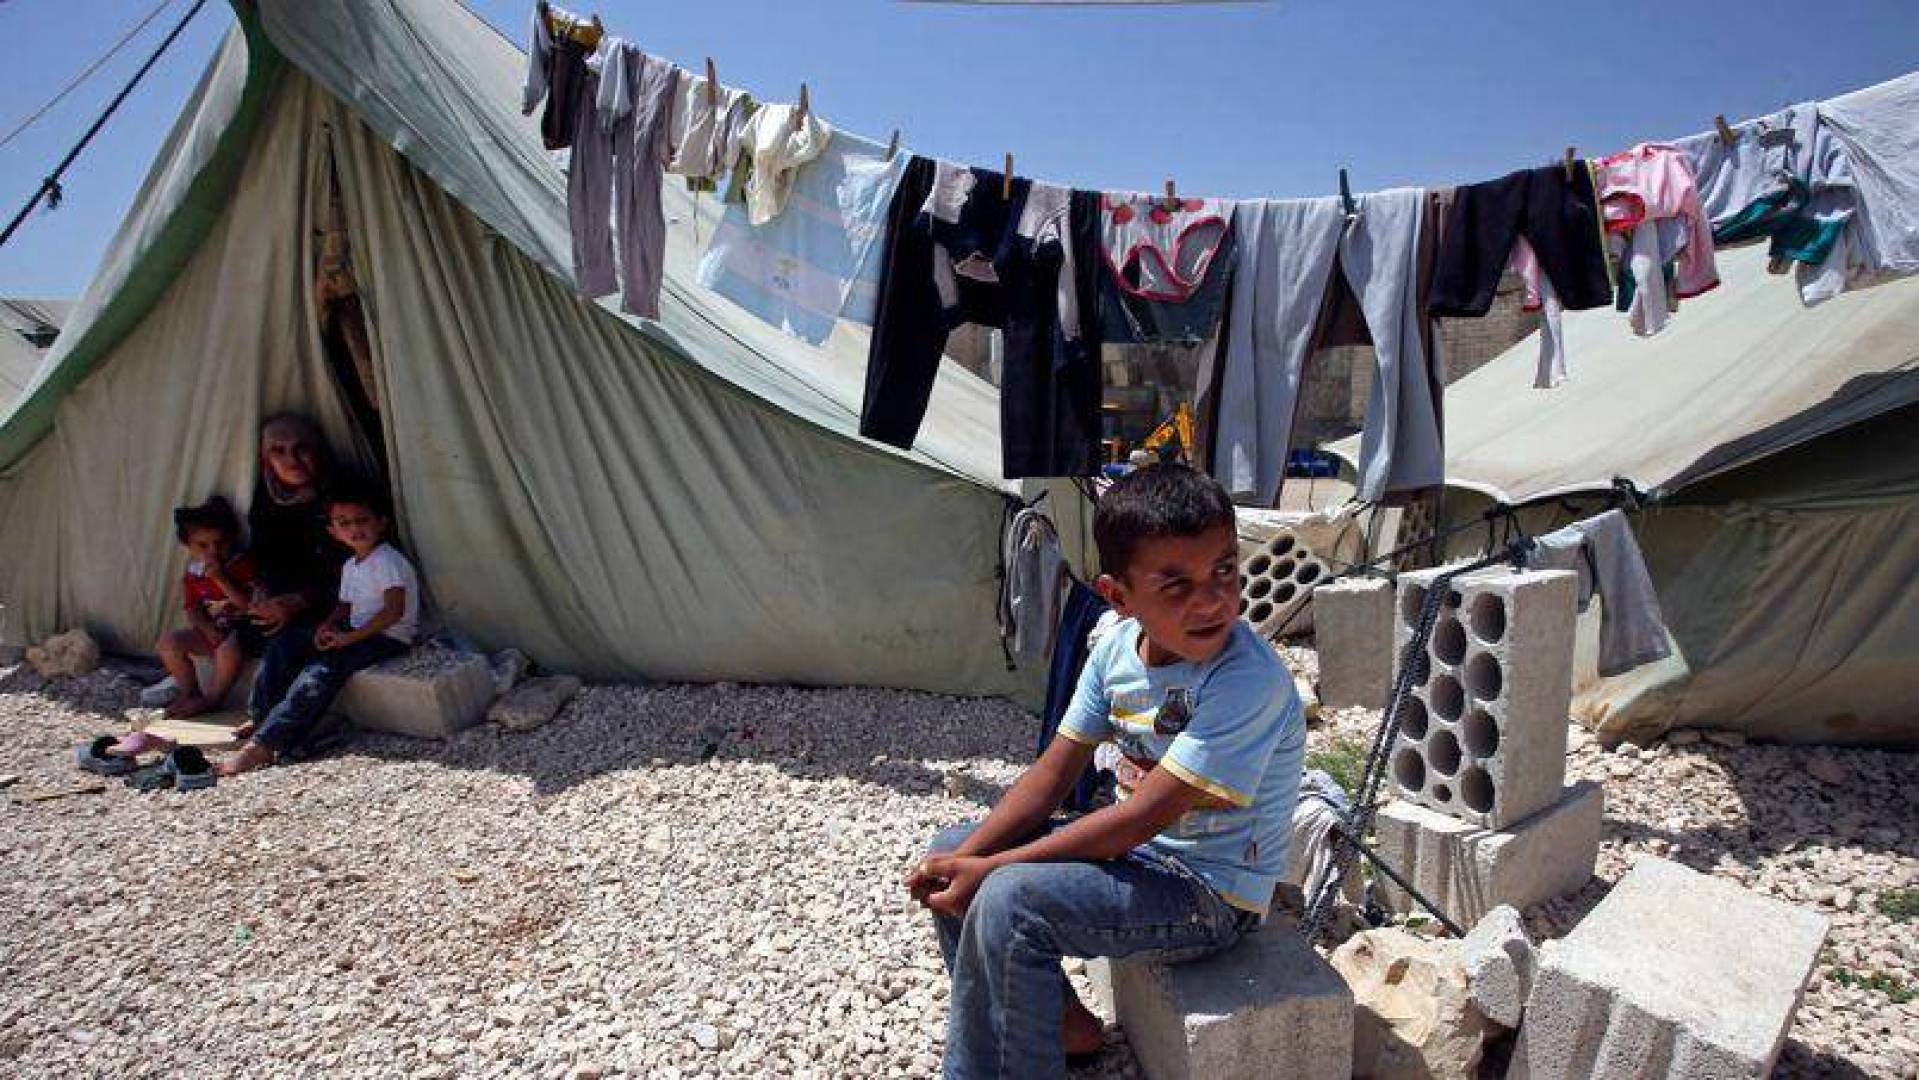 Six COVID-19 cases in a displacement camp and UNHCR warns of a disaster